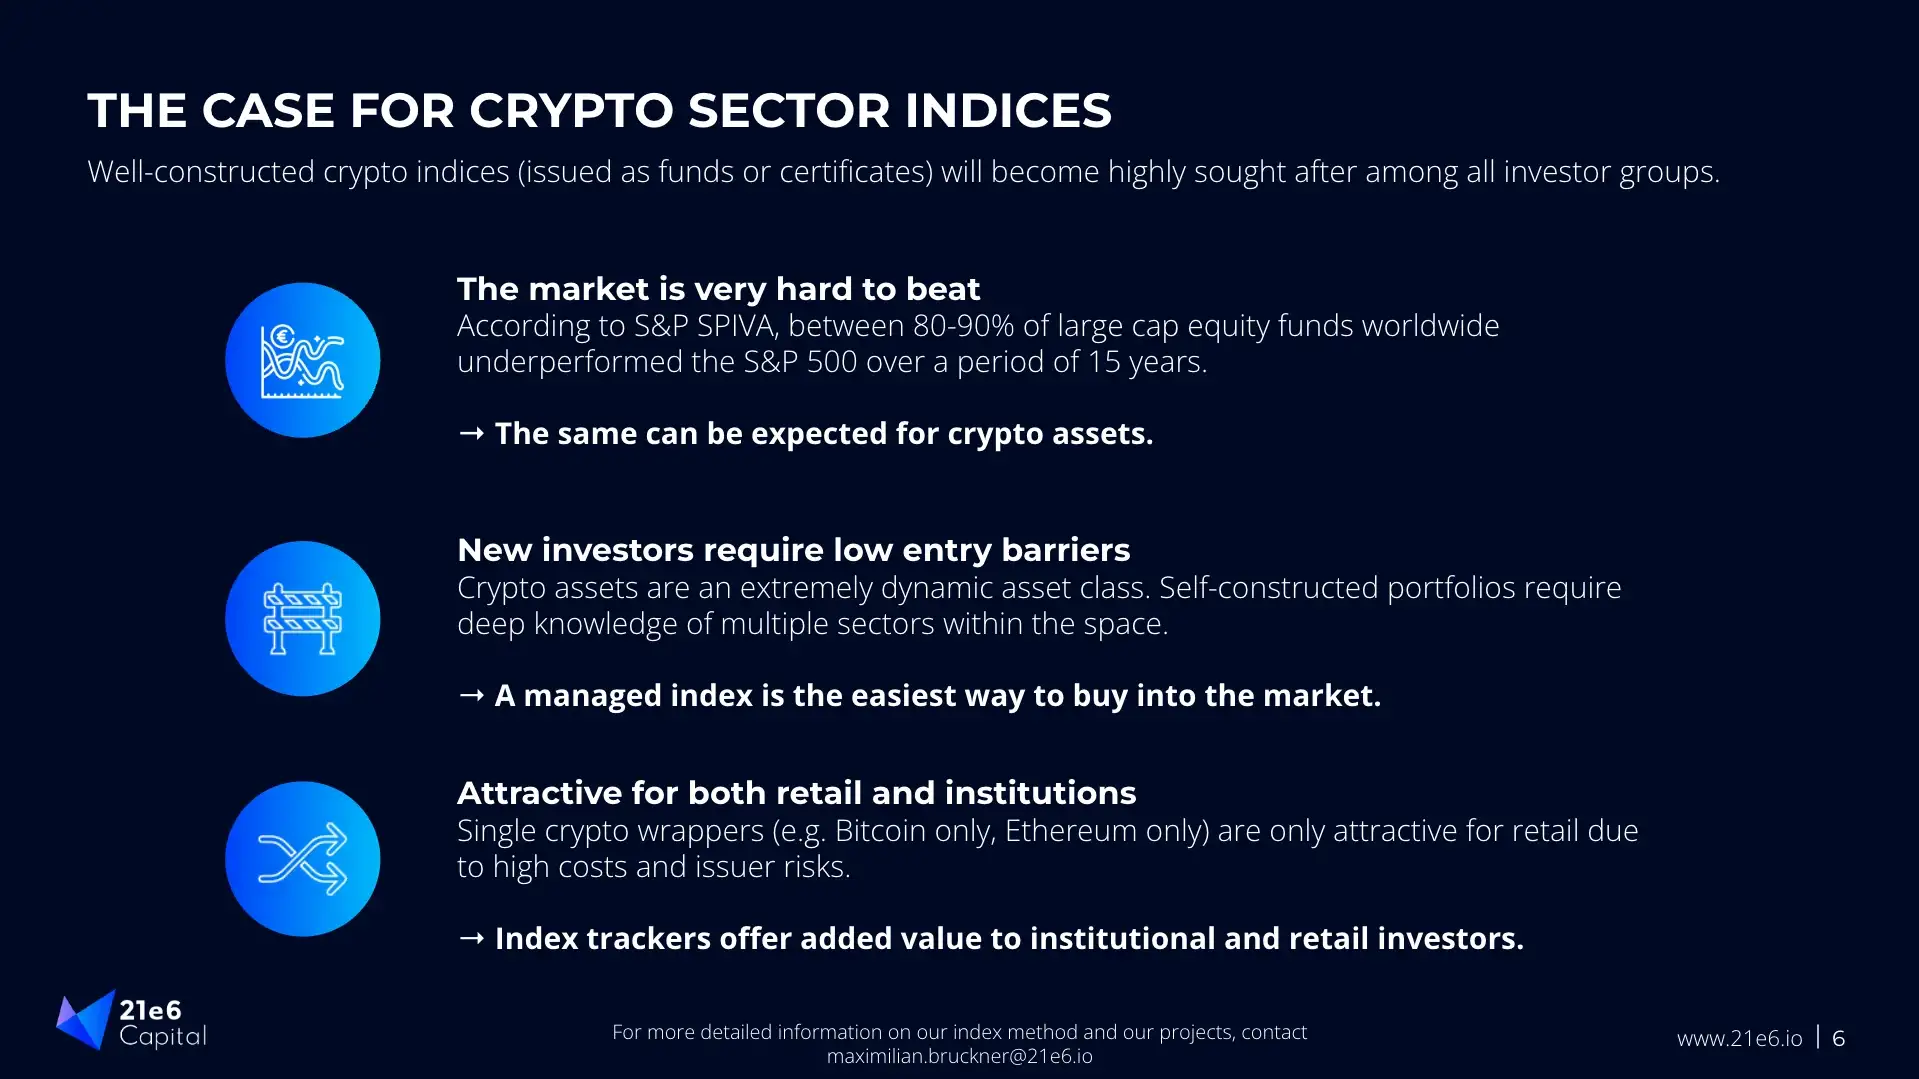 The case for crypto sector indices